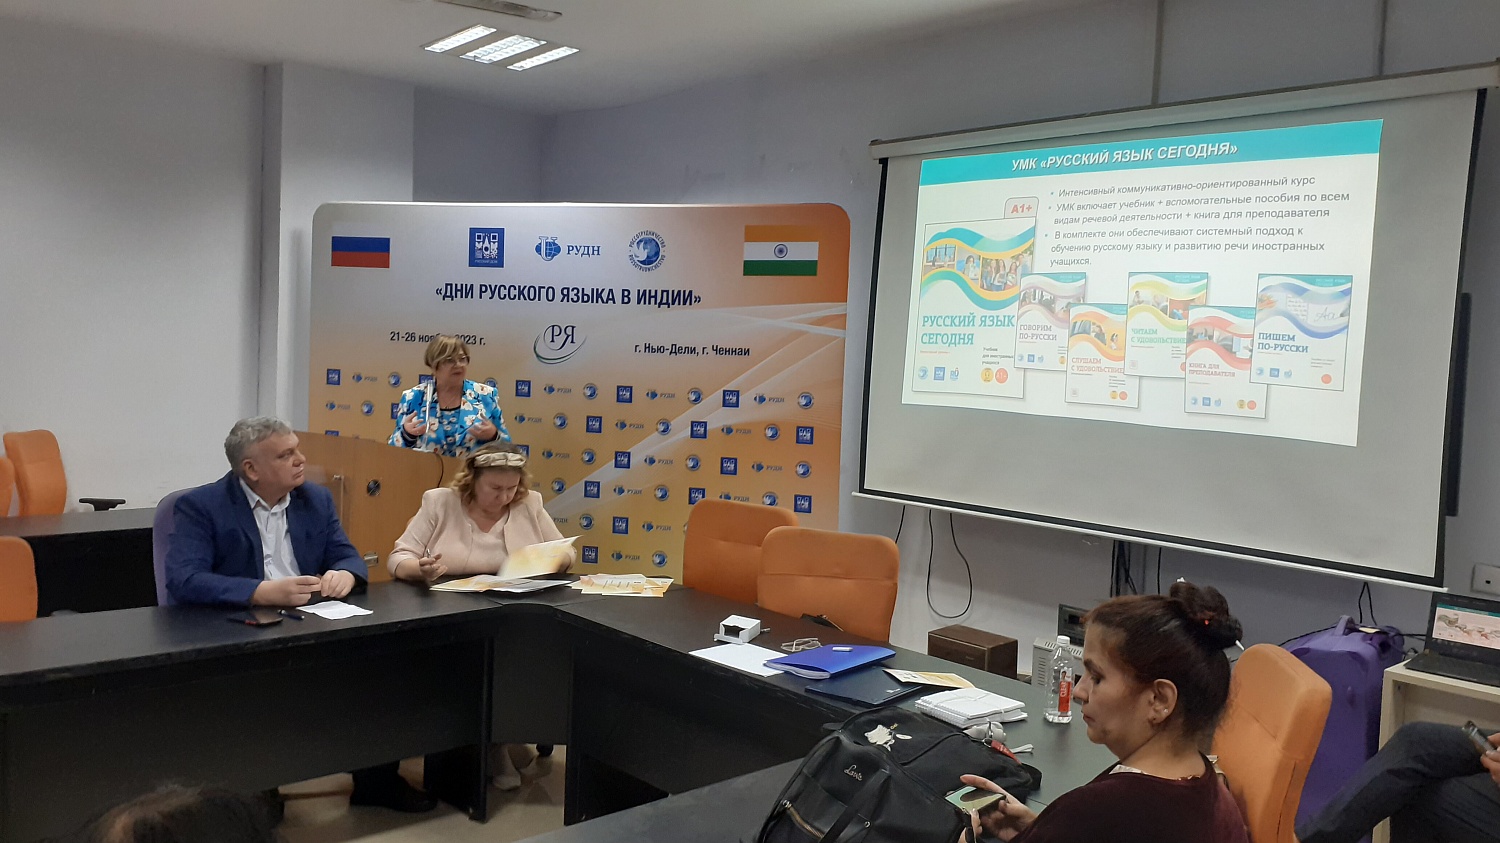 RUSSIAN LANGUAGE DAYS FROM 22 TO 26 NOVEMBER IN INDIA